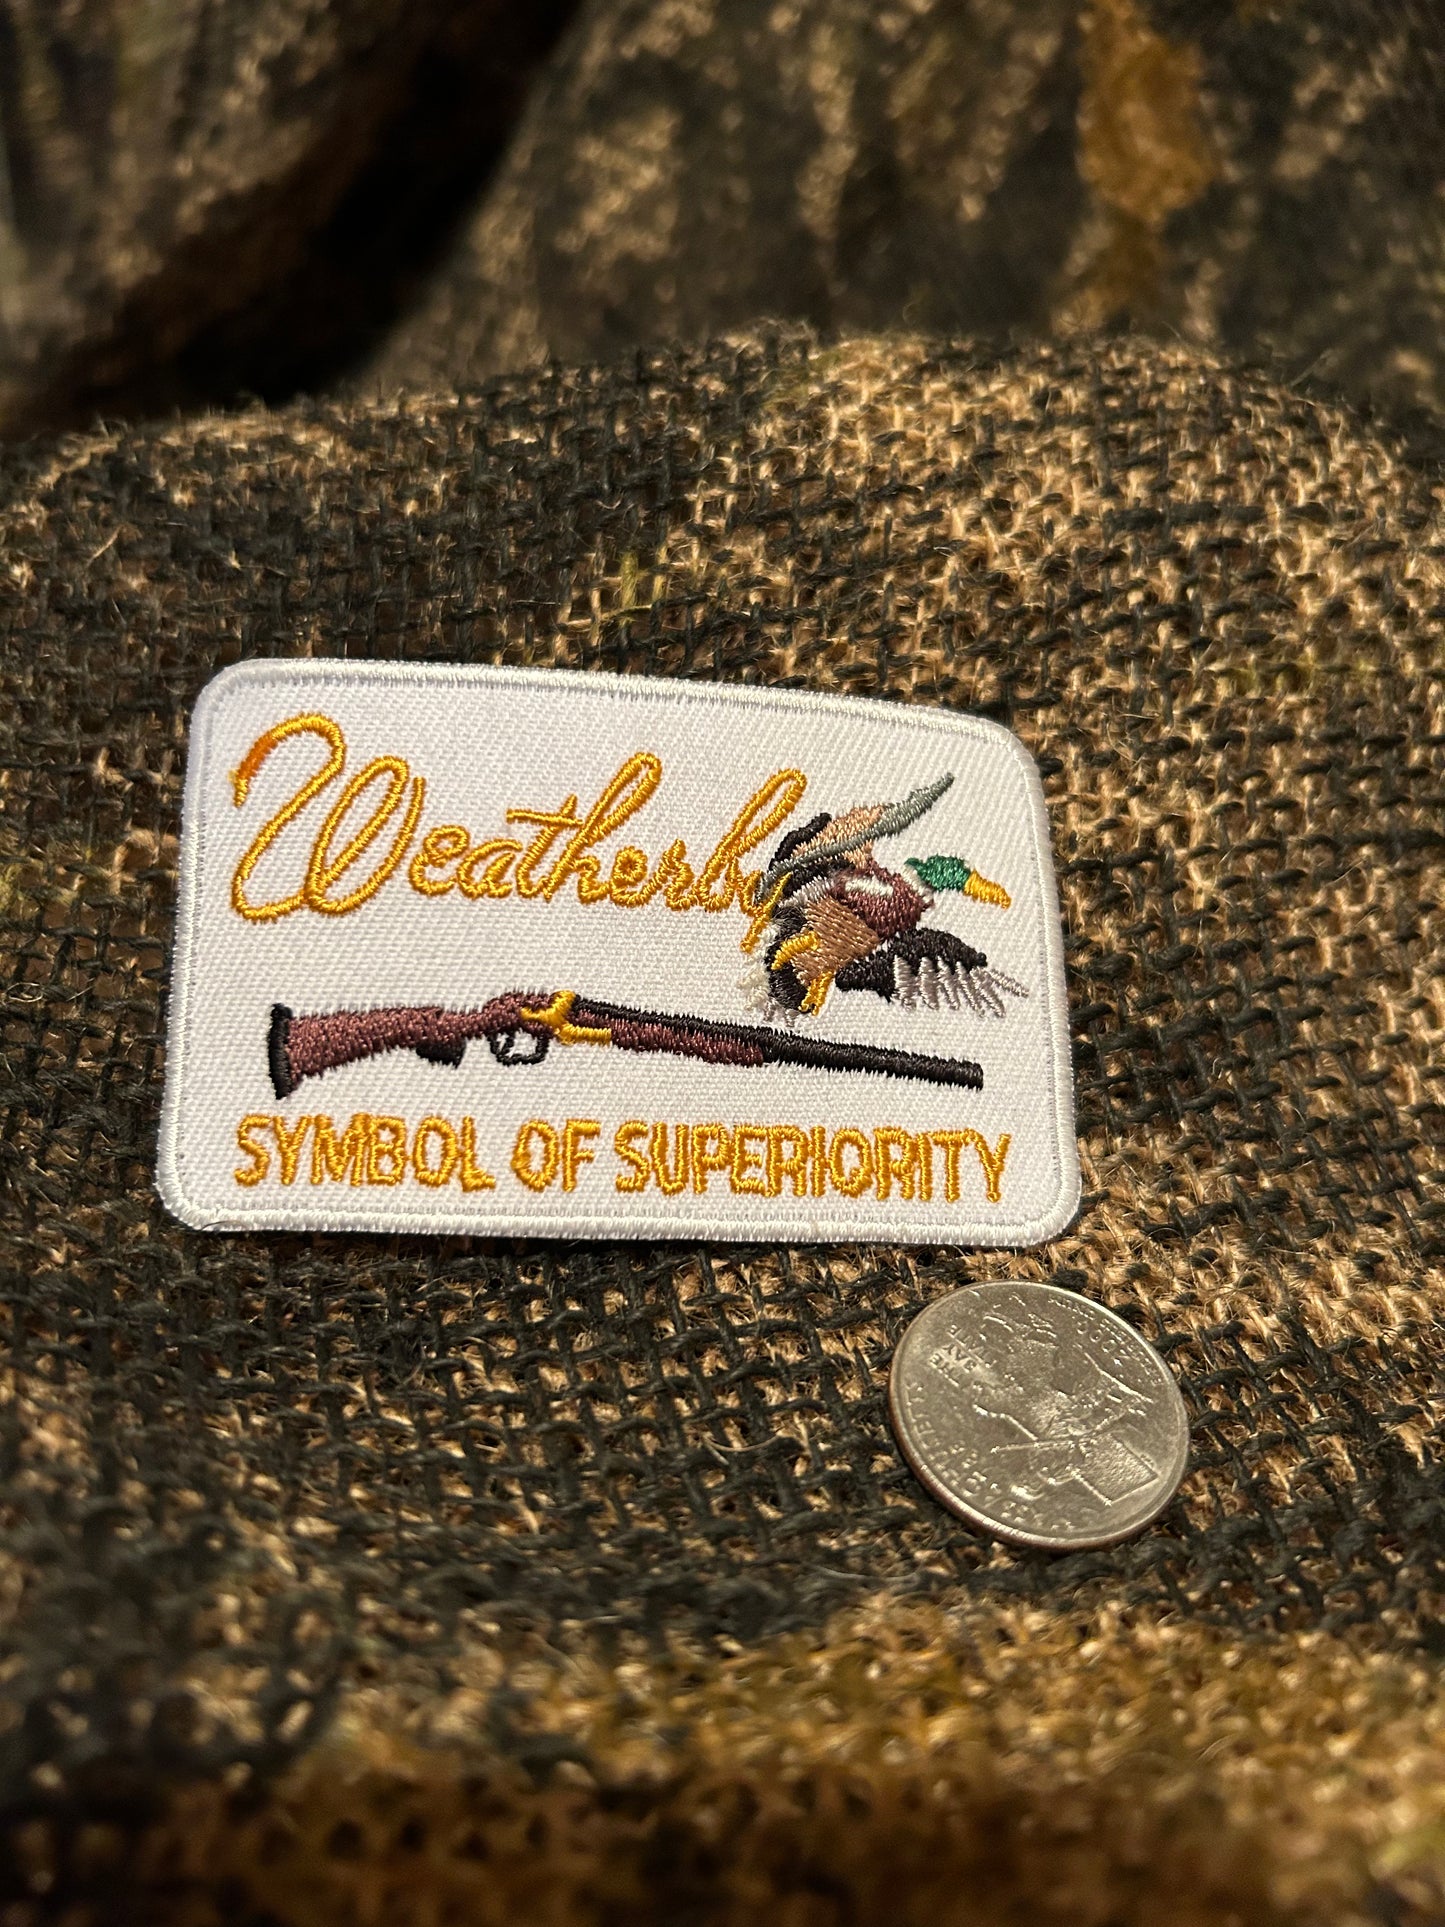 Weatherby symbol of superiority Duck patch